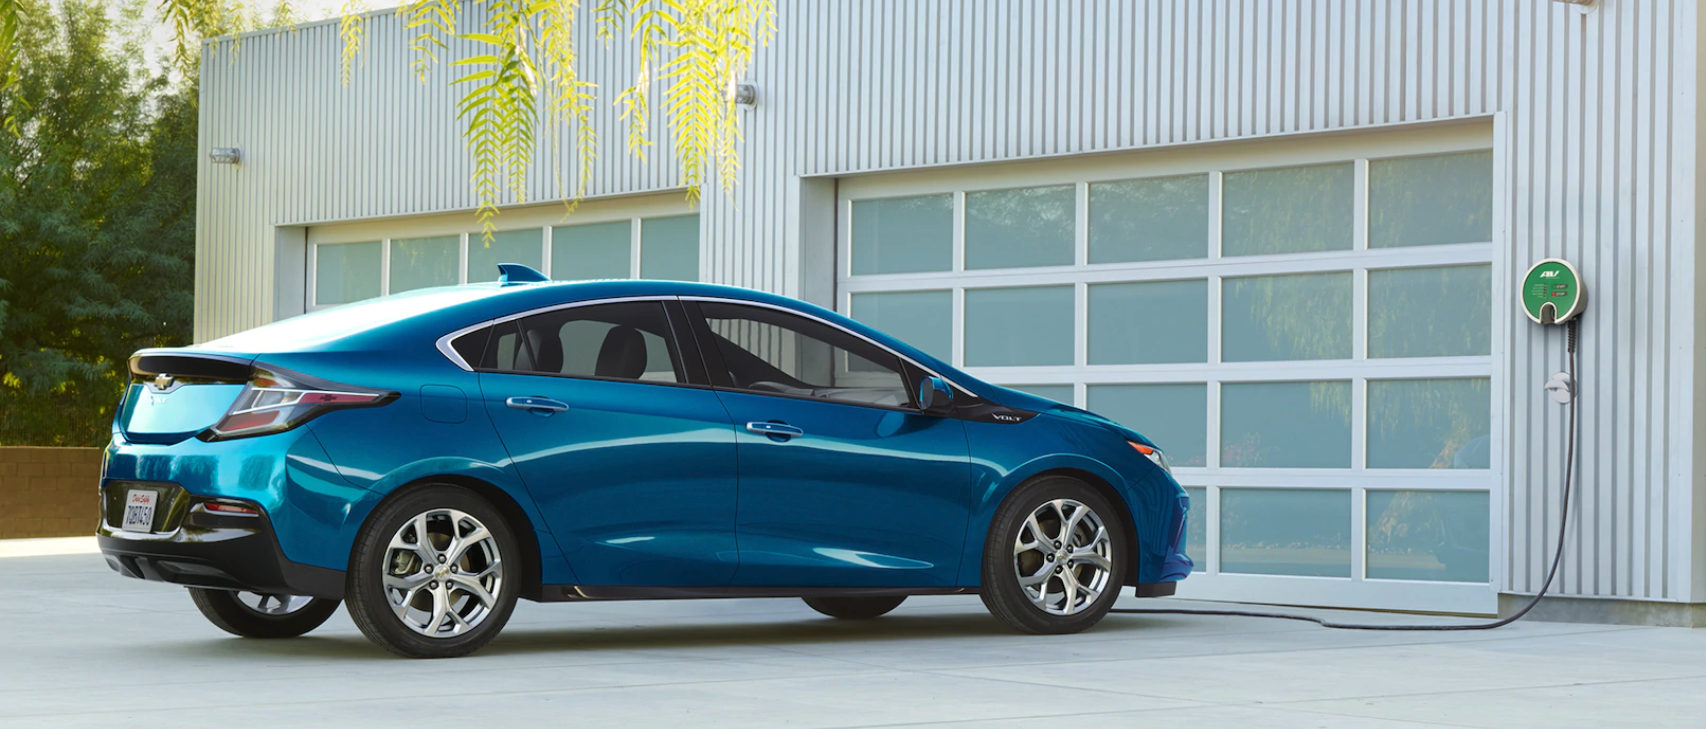 Blue 2019 Chevy Volt connected to wall charger